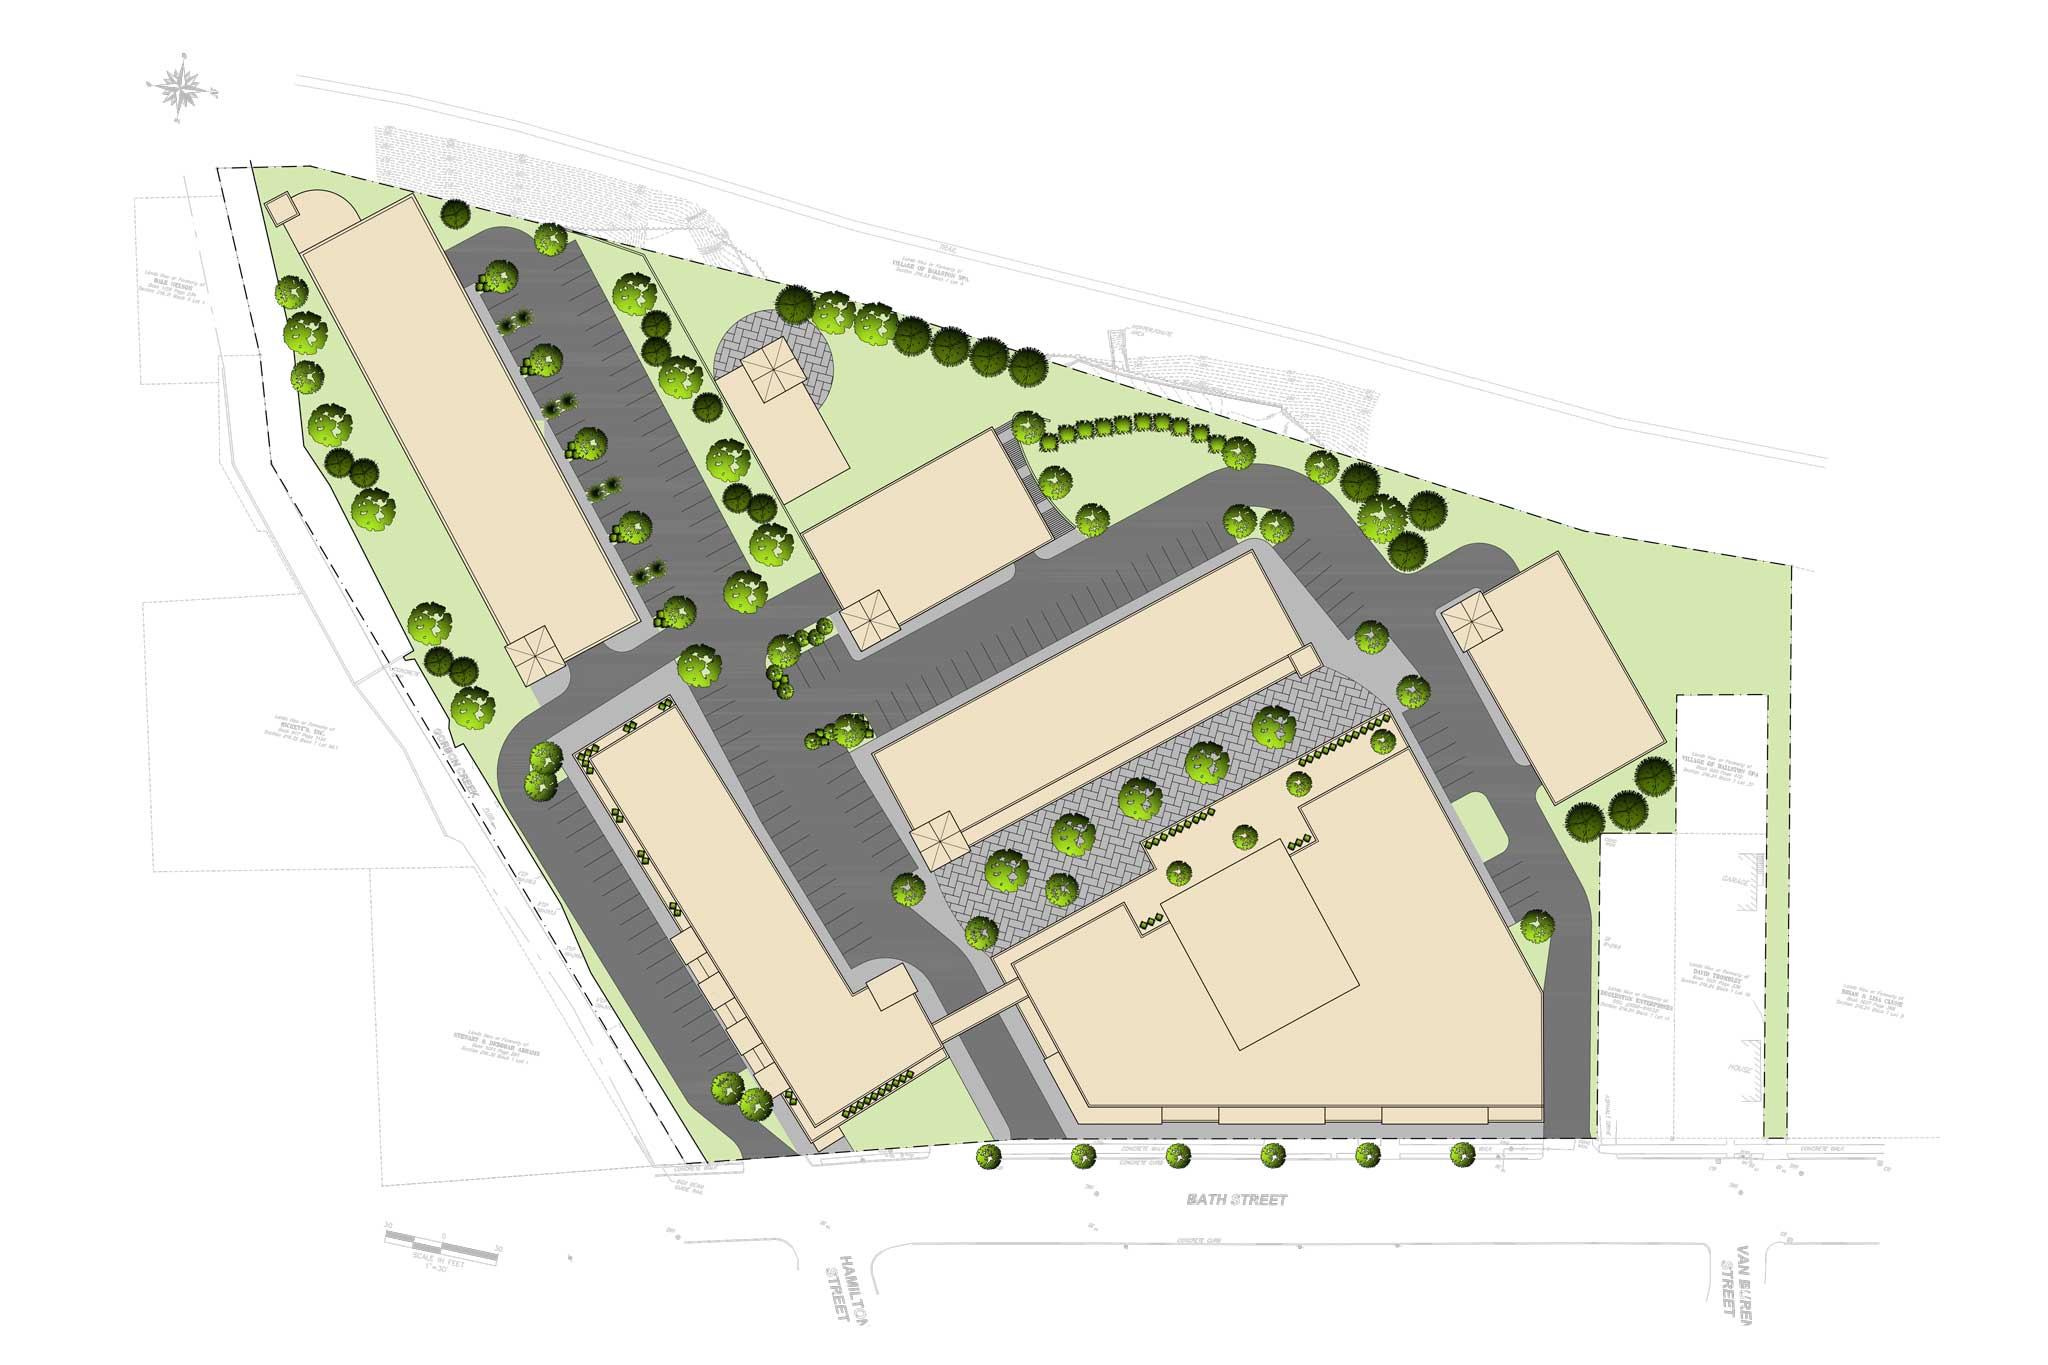 Aerial site plan showing communinty connection and a pedestrian friendly mixed-use development of a brownfield site - In urban planning, brownfield land is any previously developed land that is not currently in use that may be potentially contaminated. The term is also used to describe land previously used for industrial or commercial purposes with known or suspected pollution including soil contamination due to hazardous waste.